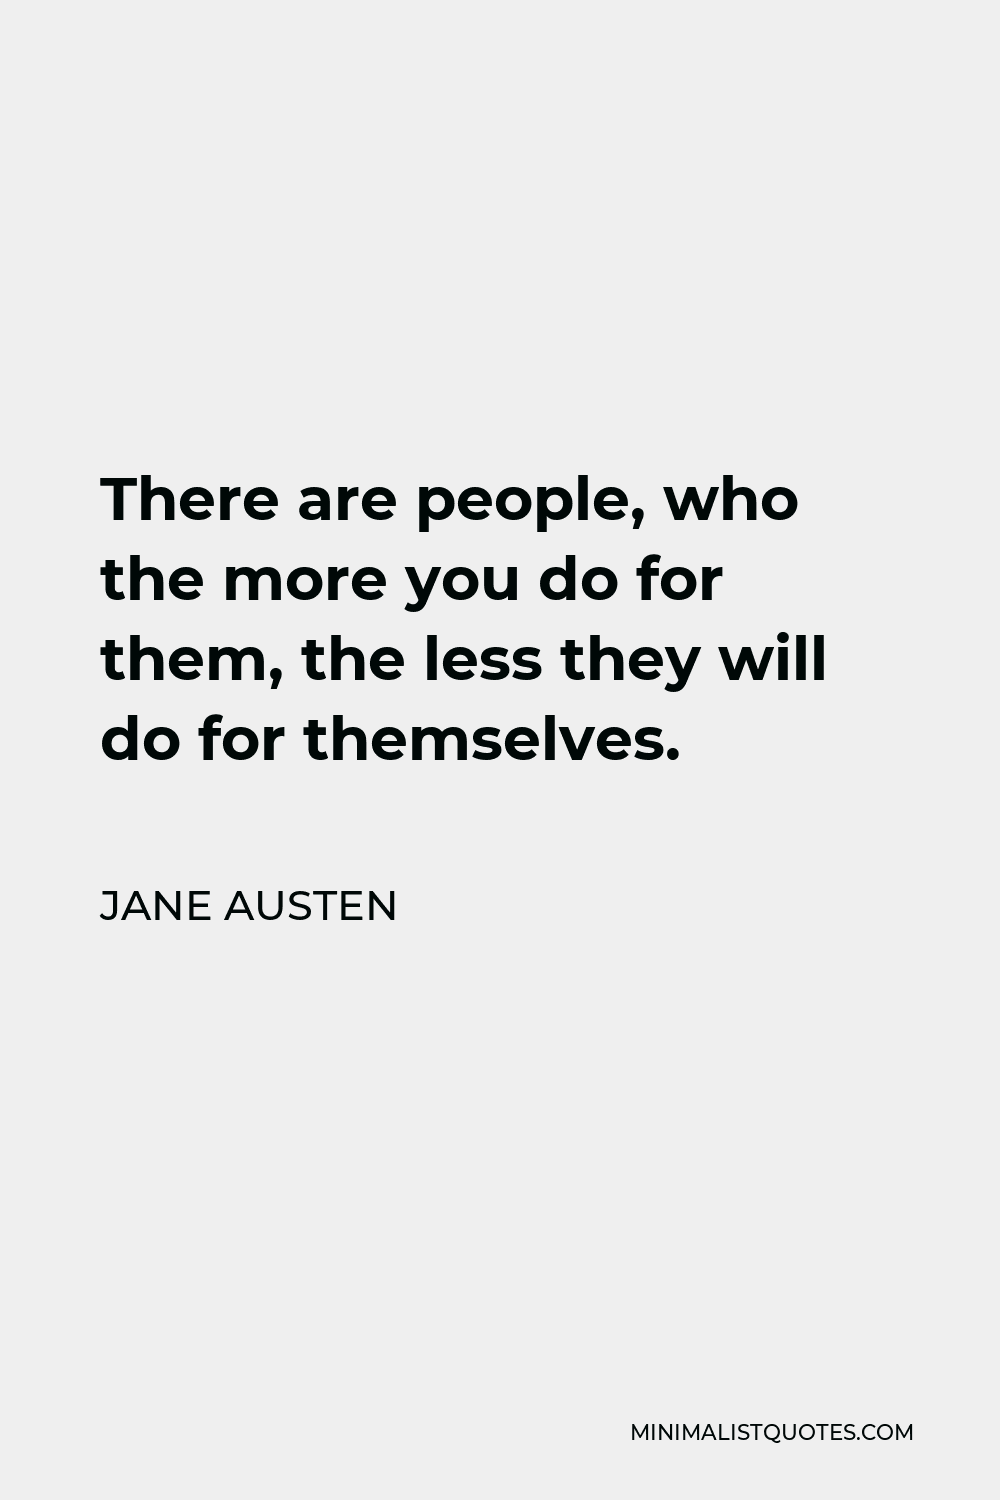 Jane Austen Quote - There are people, who the more you do for them, the less they will do for themselves.